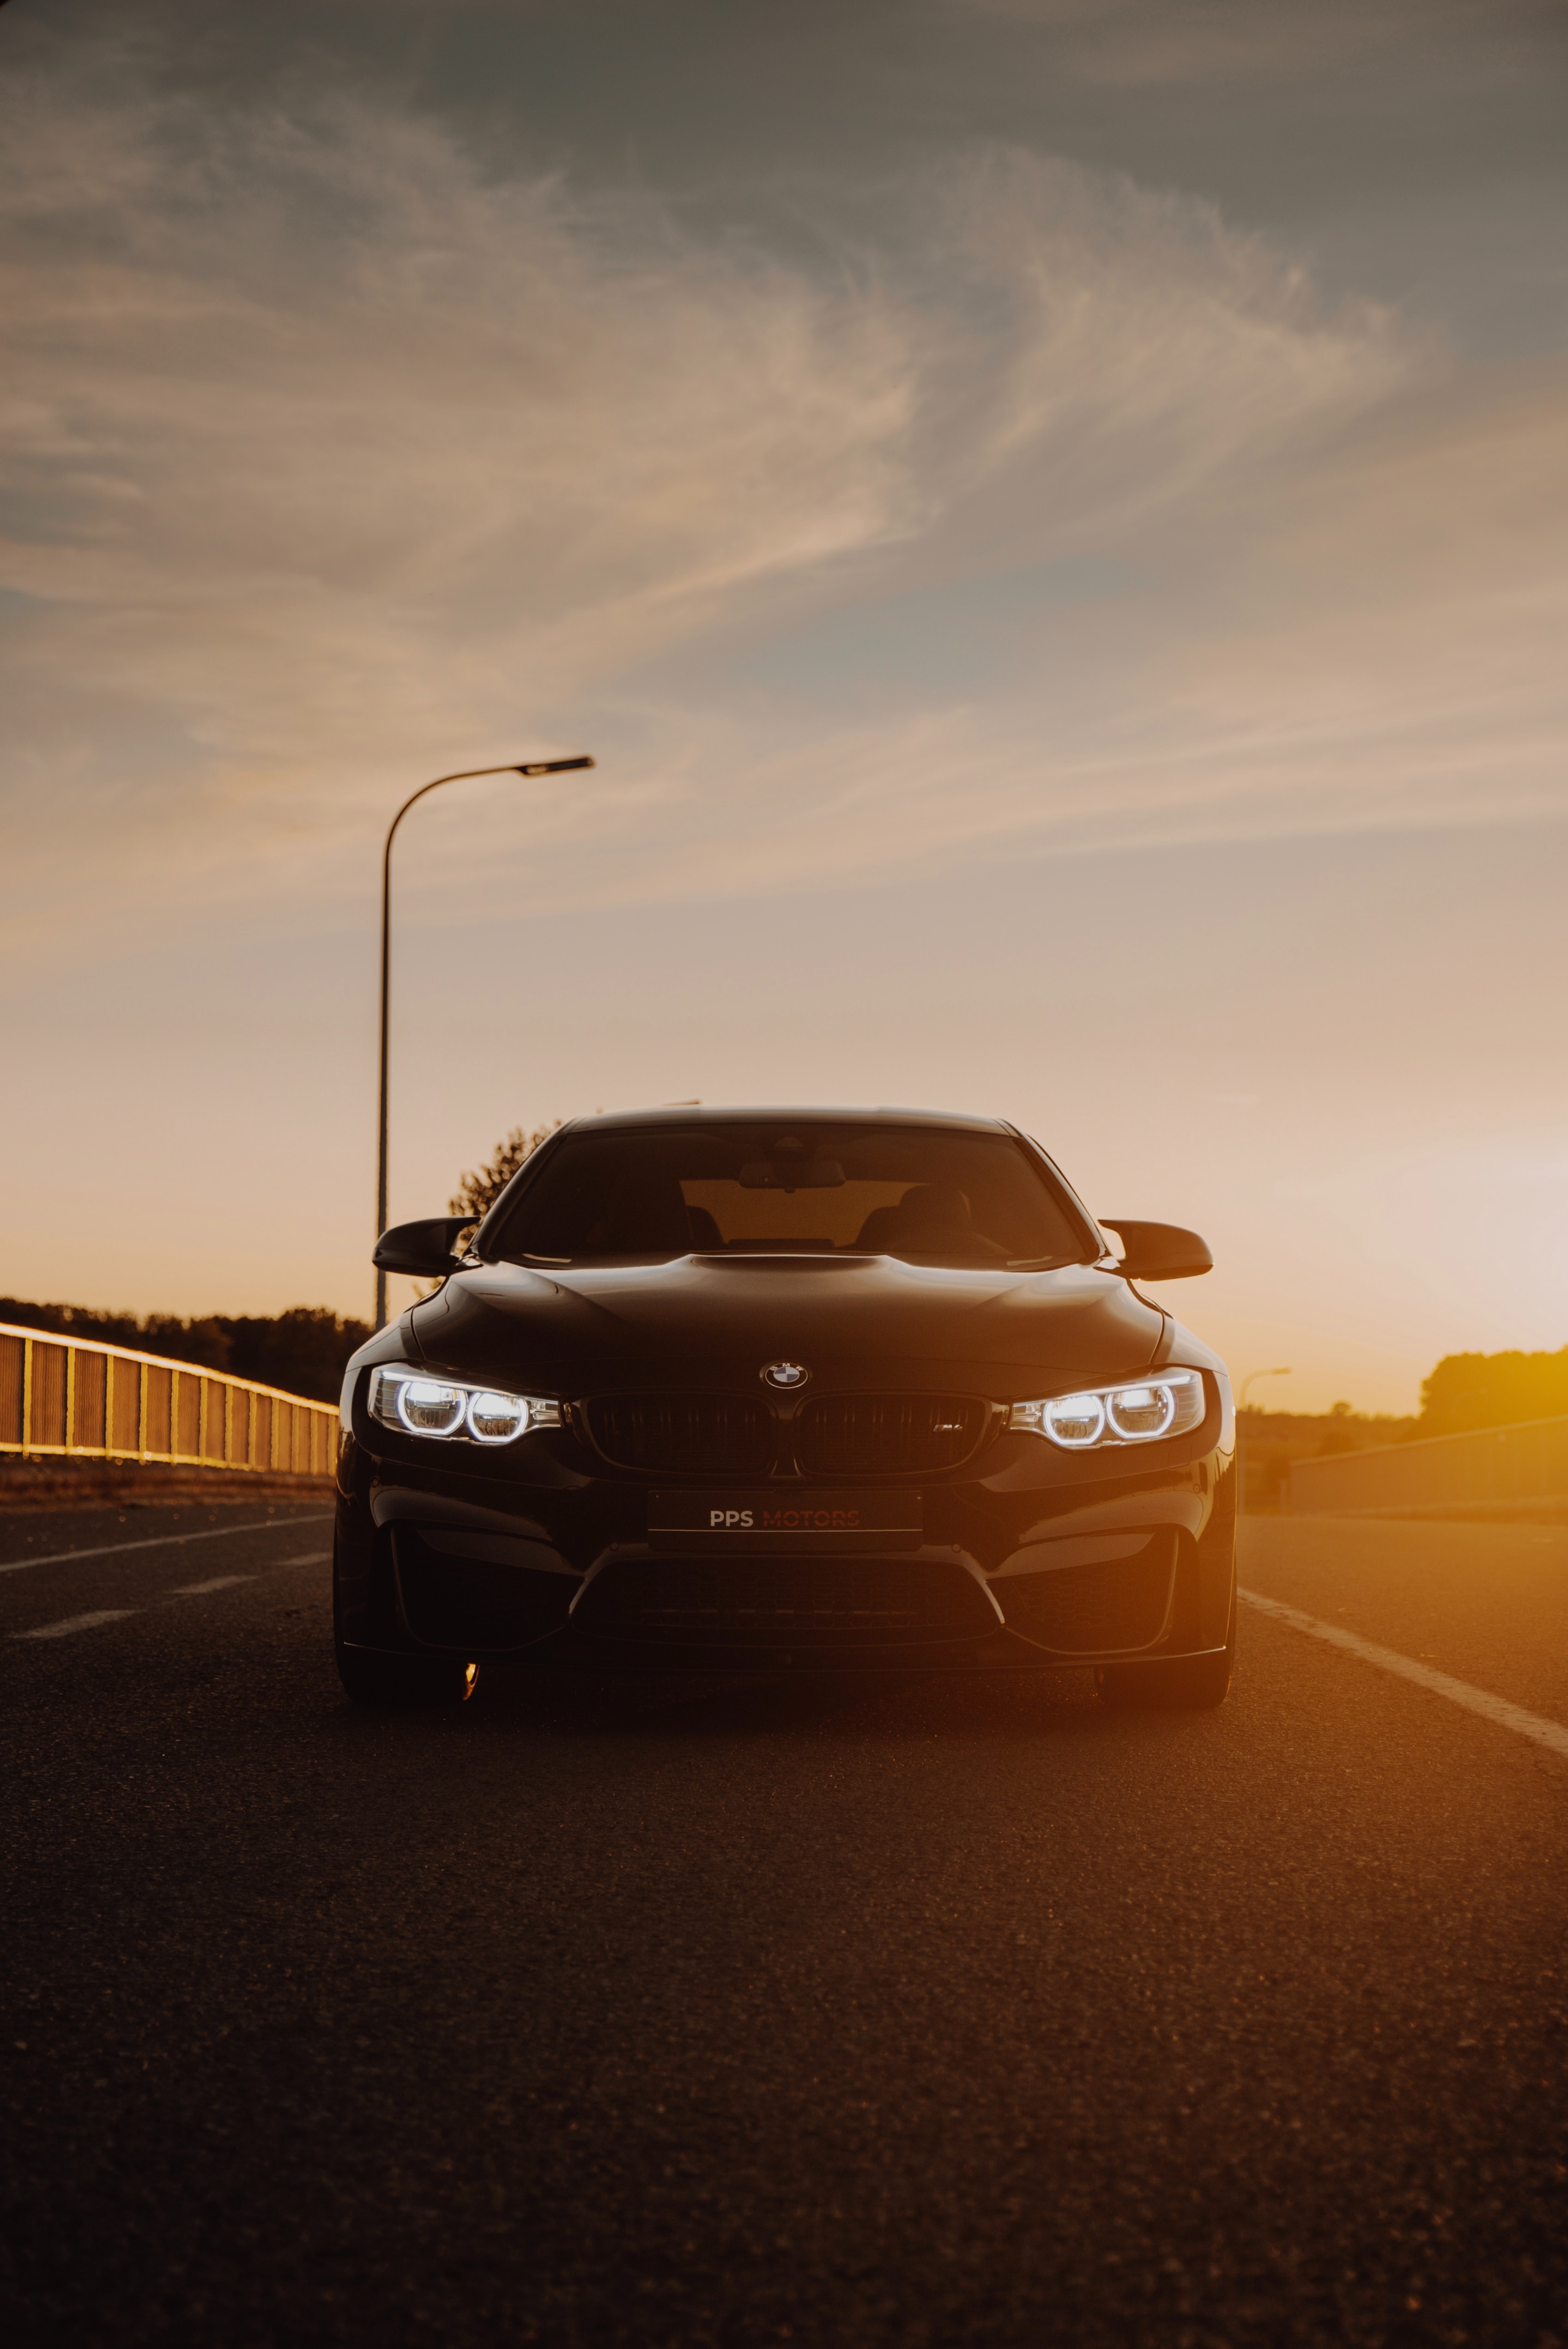 sports car, bmw, sports, cars, beams, rays, car, front view, bmw m4 wallpaper for mobile